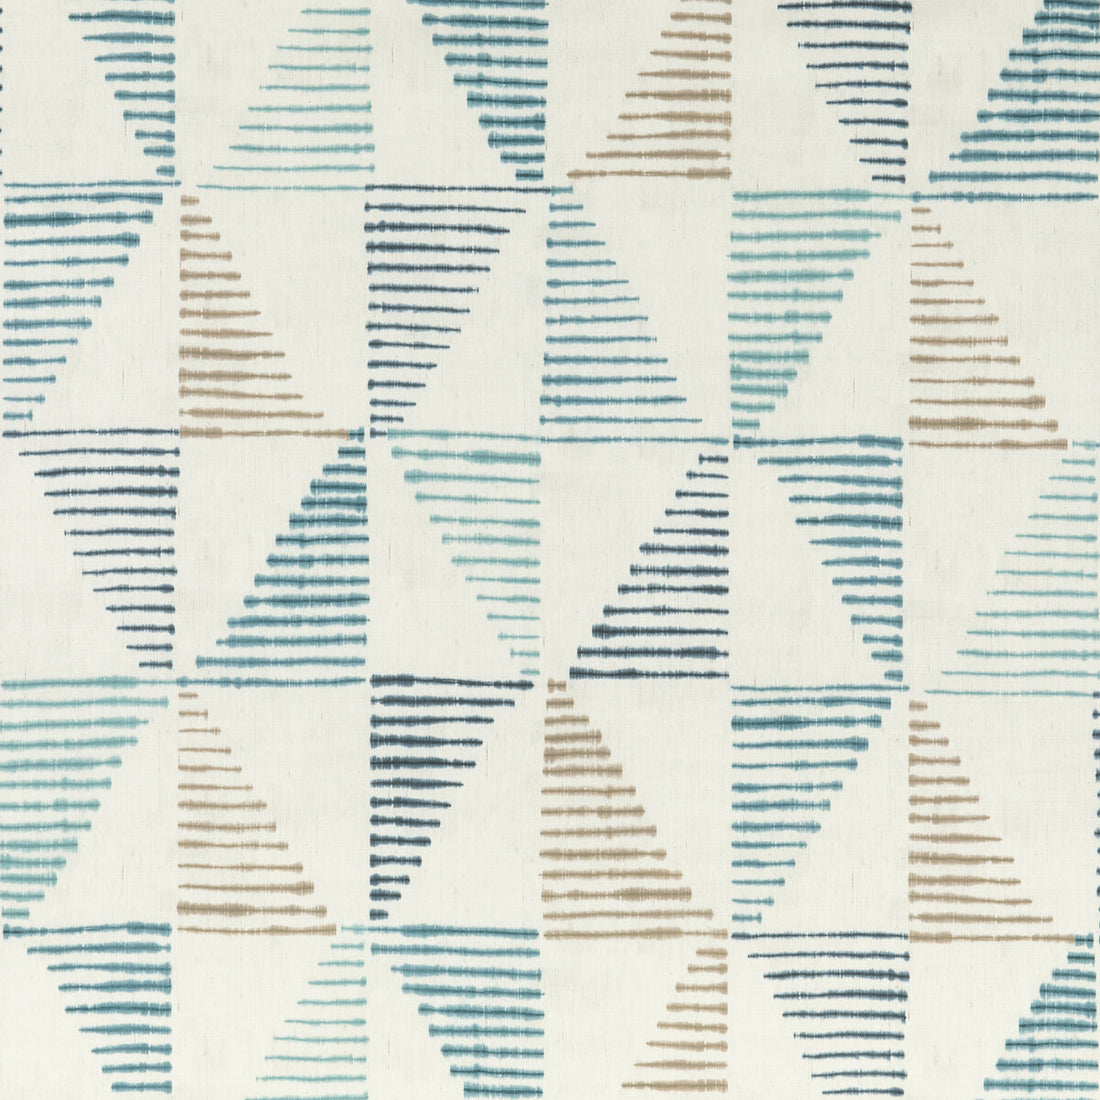 Kaya fabric in indigo color - pattern ED75040.1.0 - by Threads in the Nala Prints collection